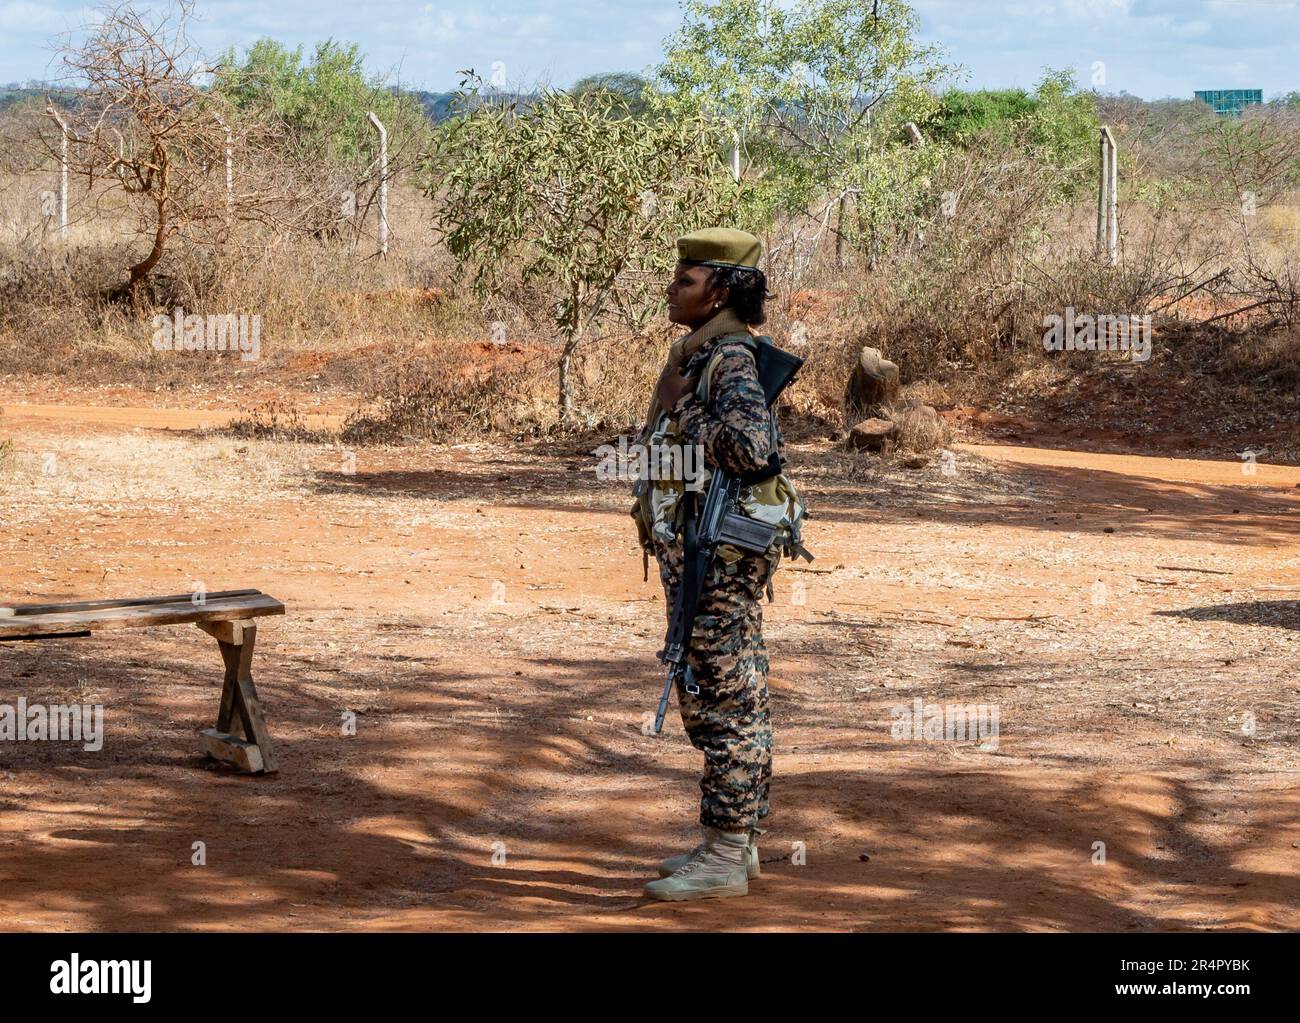 A female park ranger armed with long gun guards wildlife from poaching in a national park. Kenya, Africa. Stock Photo